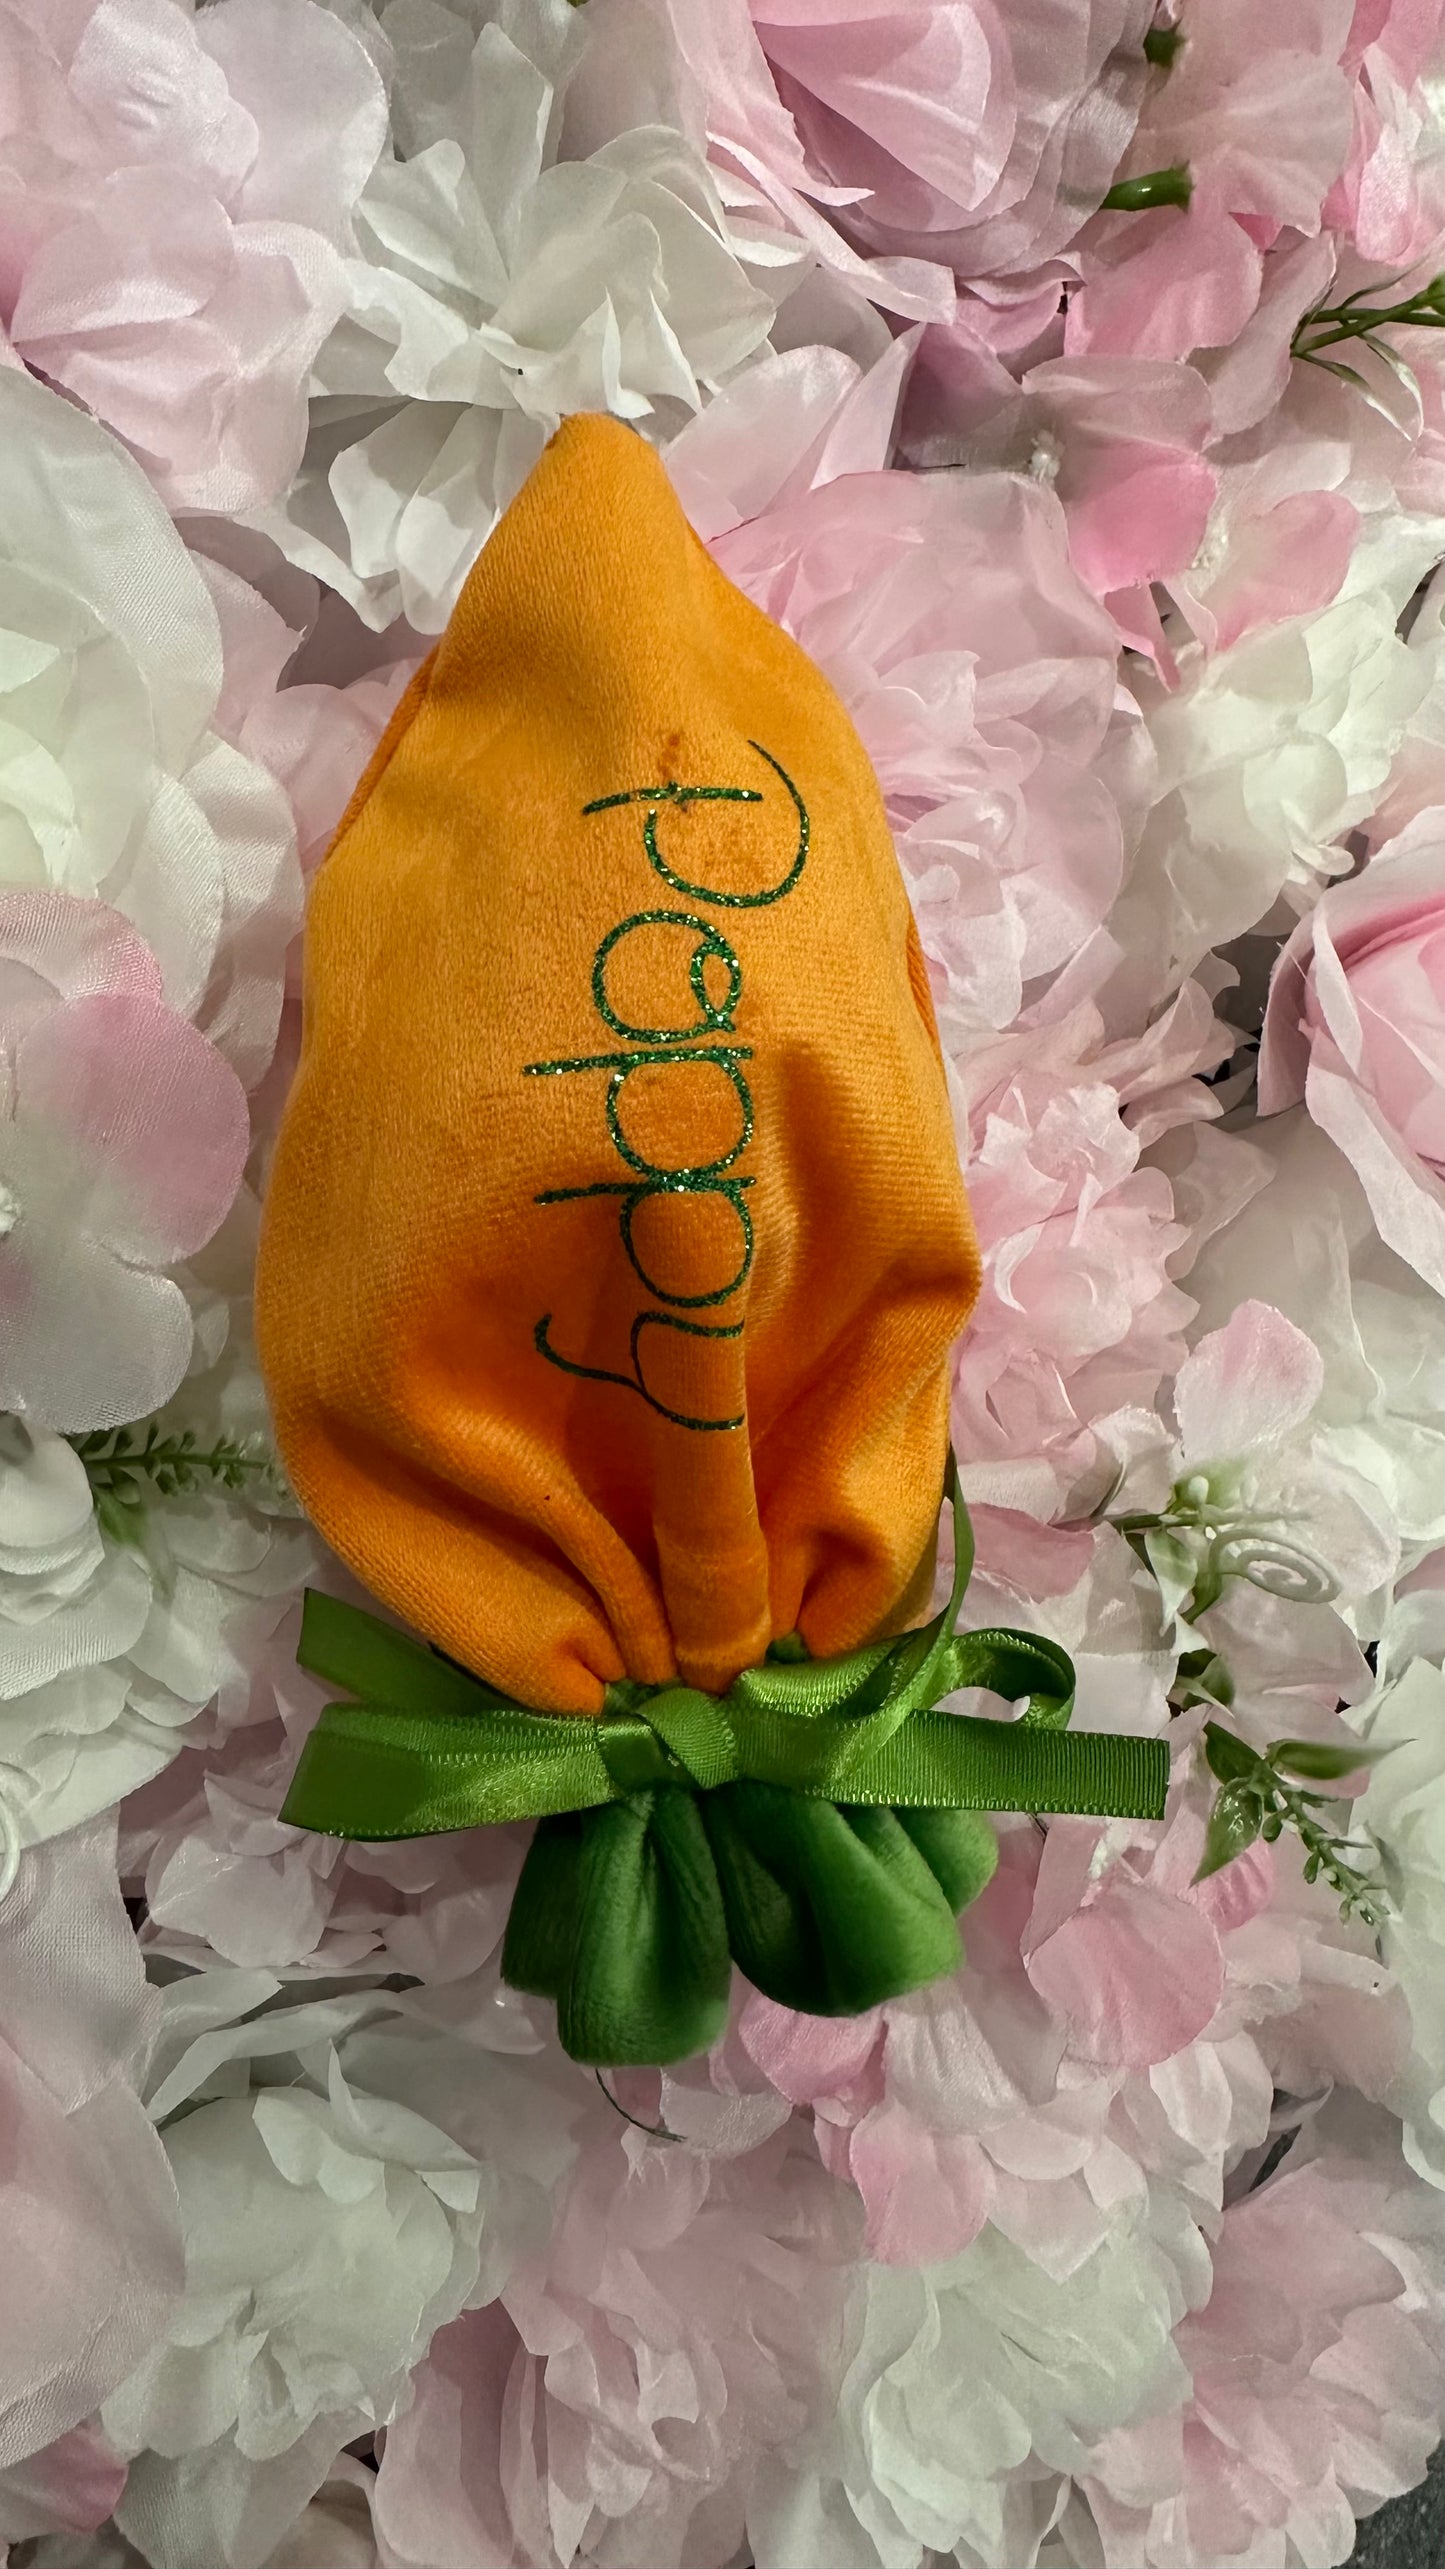 Carrot pouch treat bag